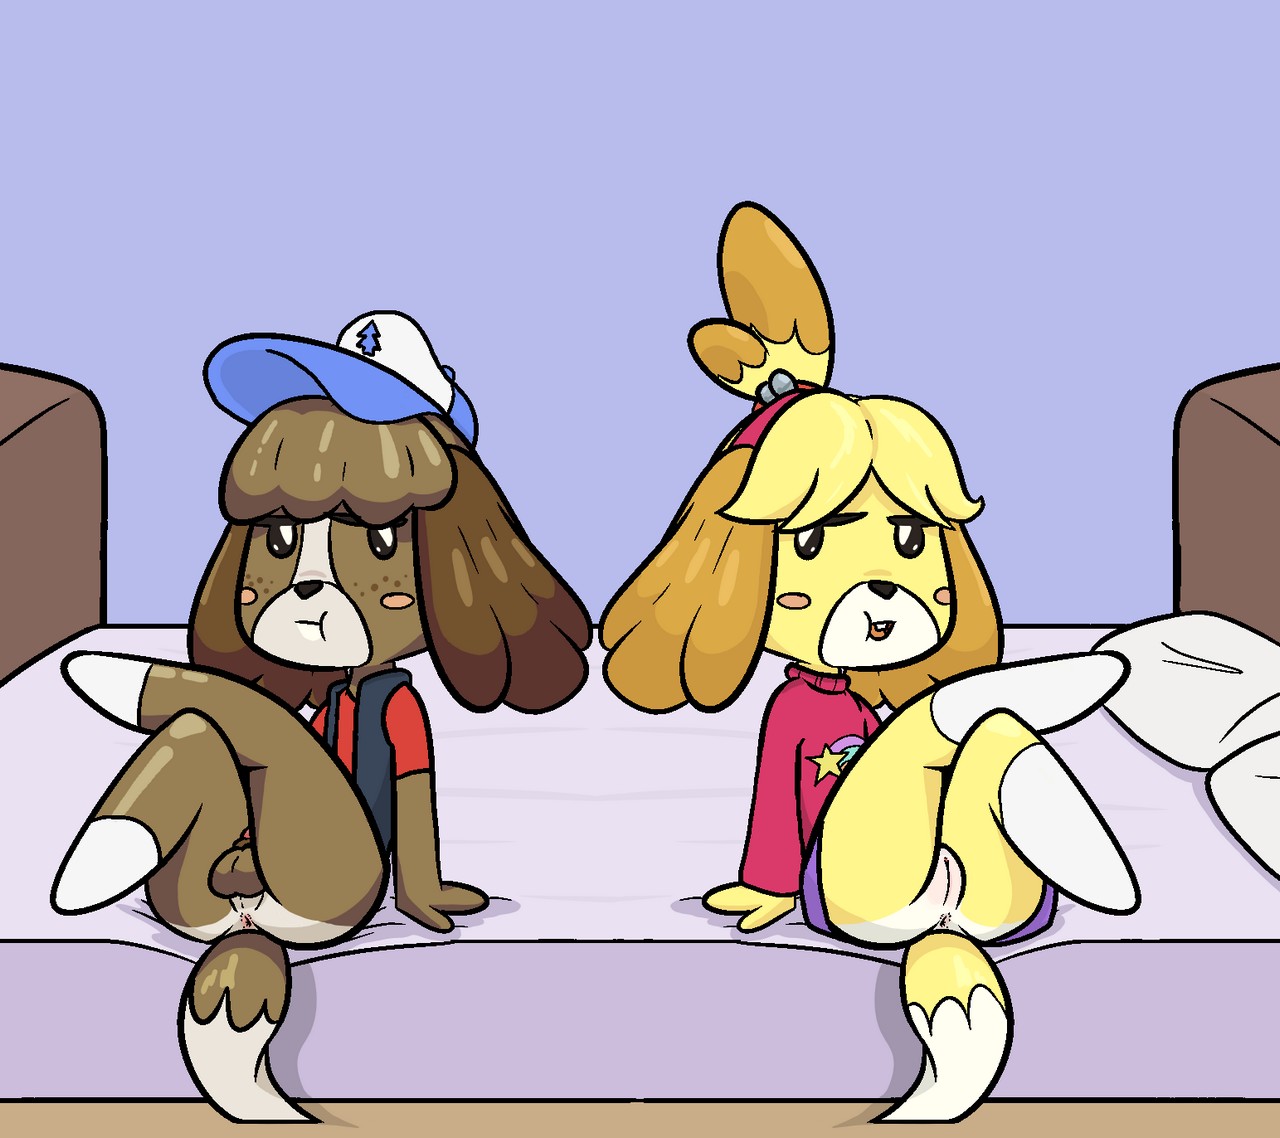 Digby Animal Crossing Dipper Pines Isabelle Animal Crossing Mabel Pines By Happy Harve